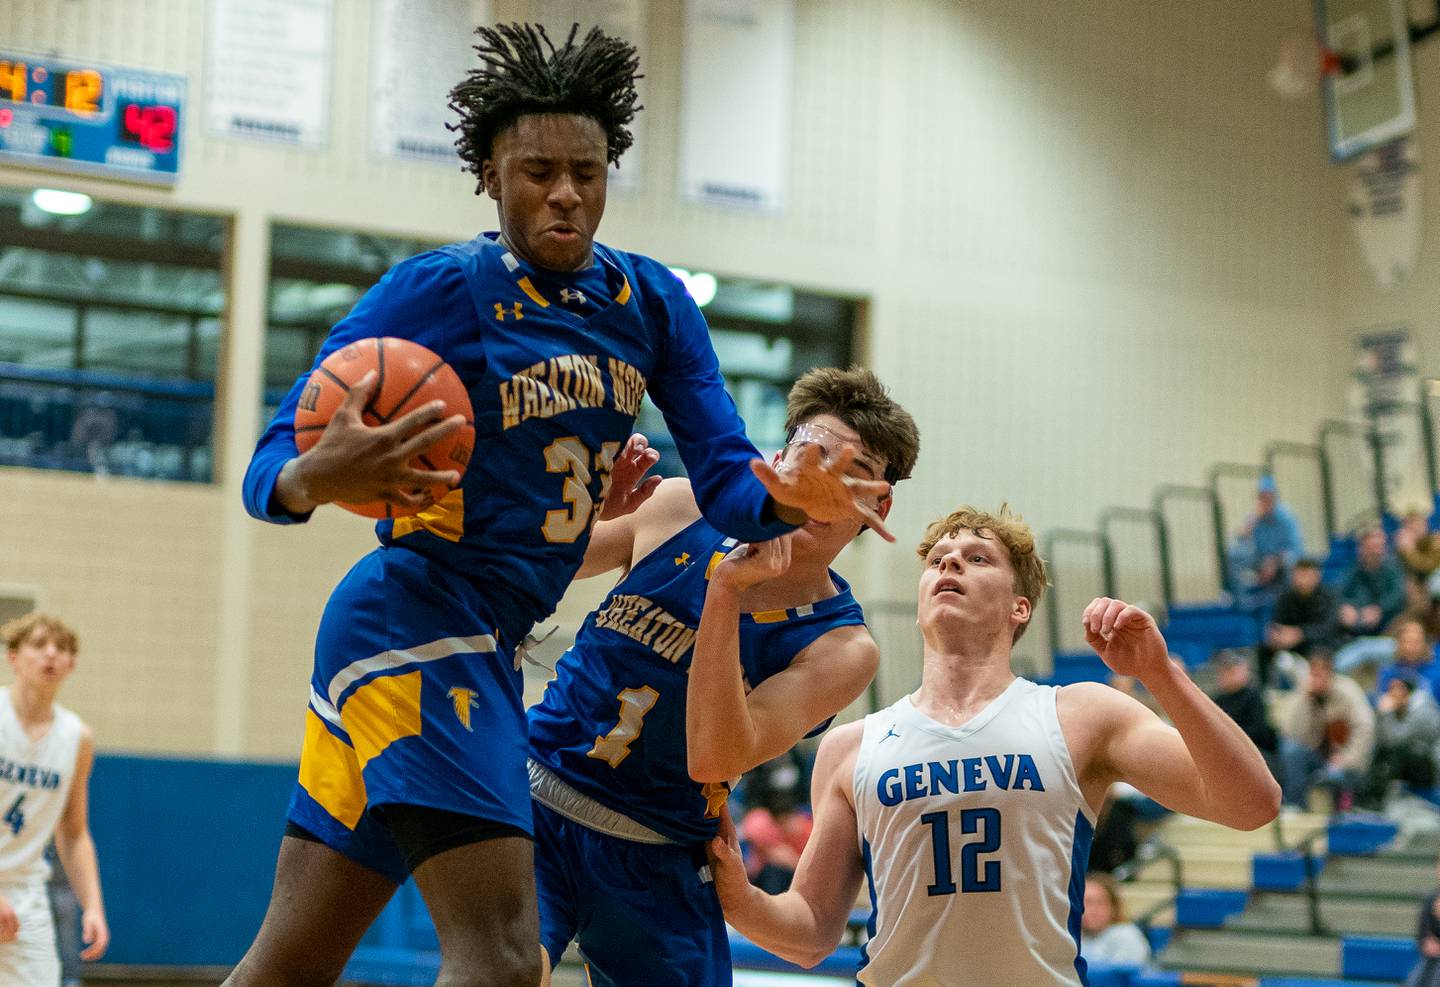 Wheaton North's Jalen Crues (33) rebounds the ball against Geneva during a basketball game at Geneva High School on Friday, Jan 6, 2023.